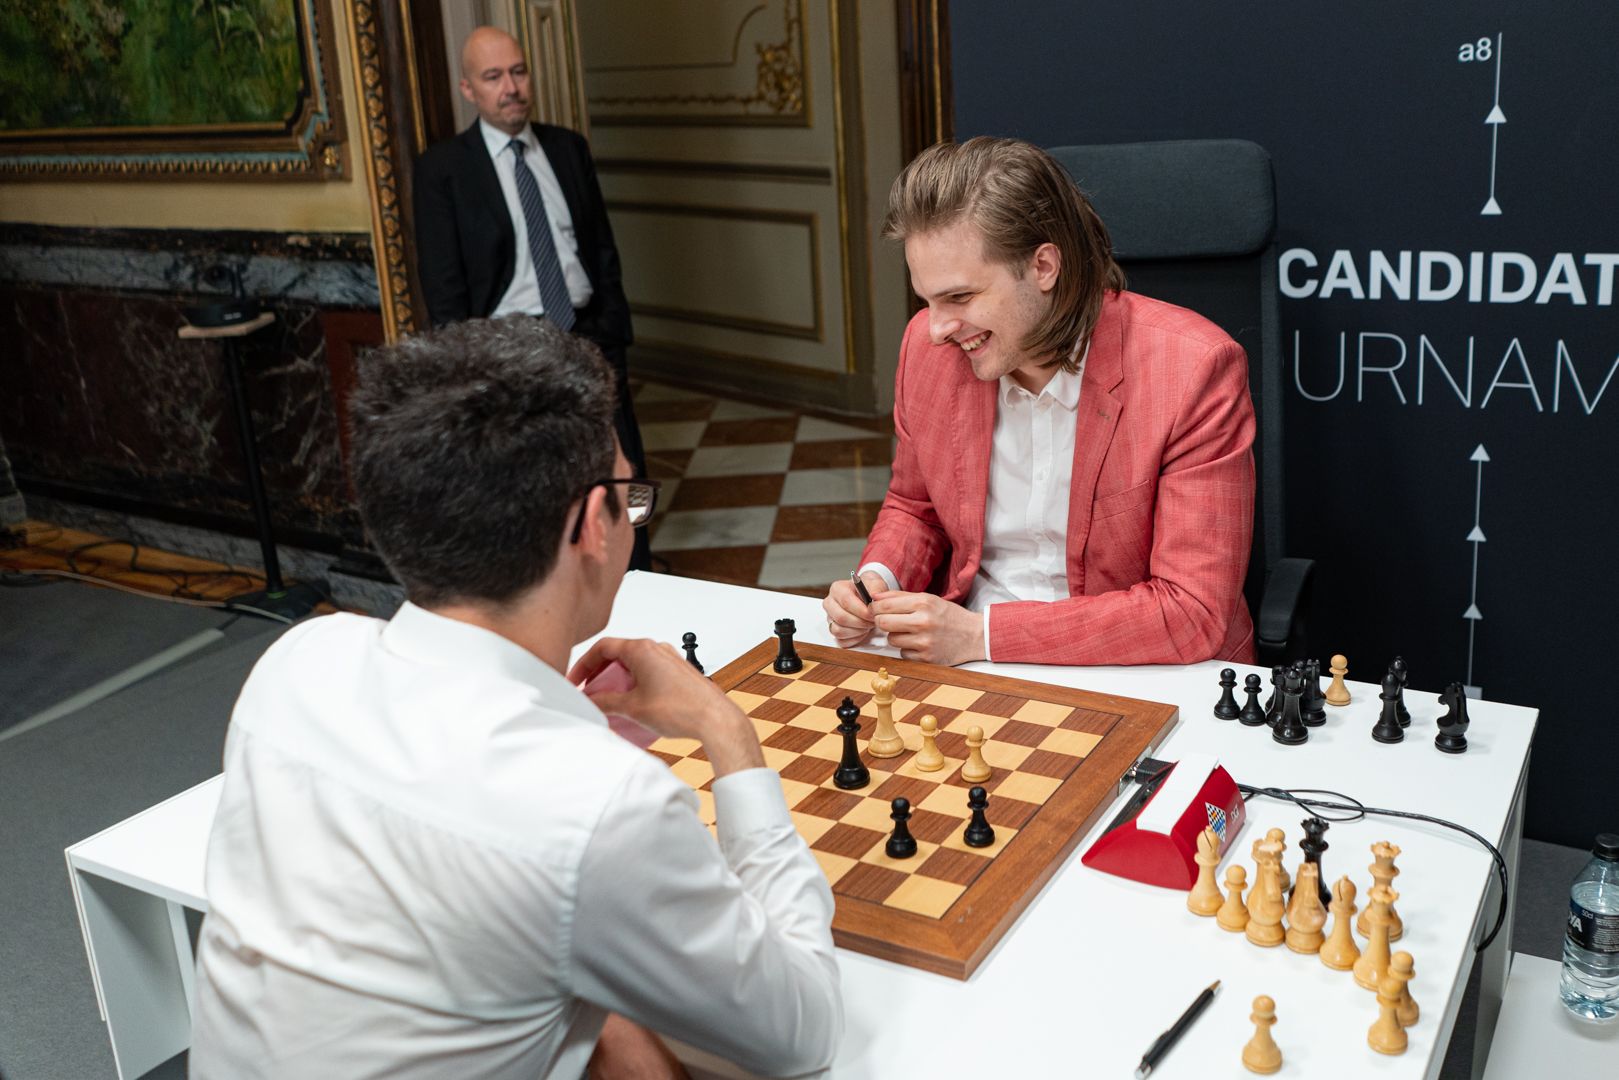 Chess.com - Round 12 of the 2022 FIDE Candidates is here!